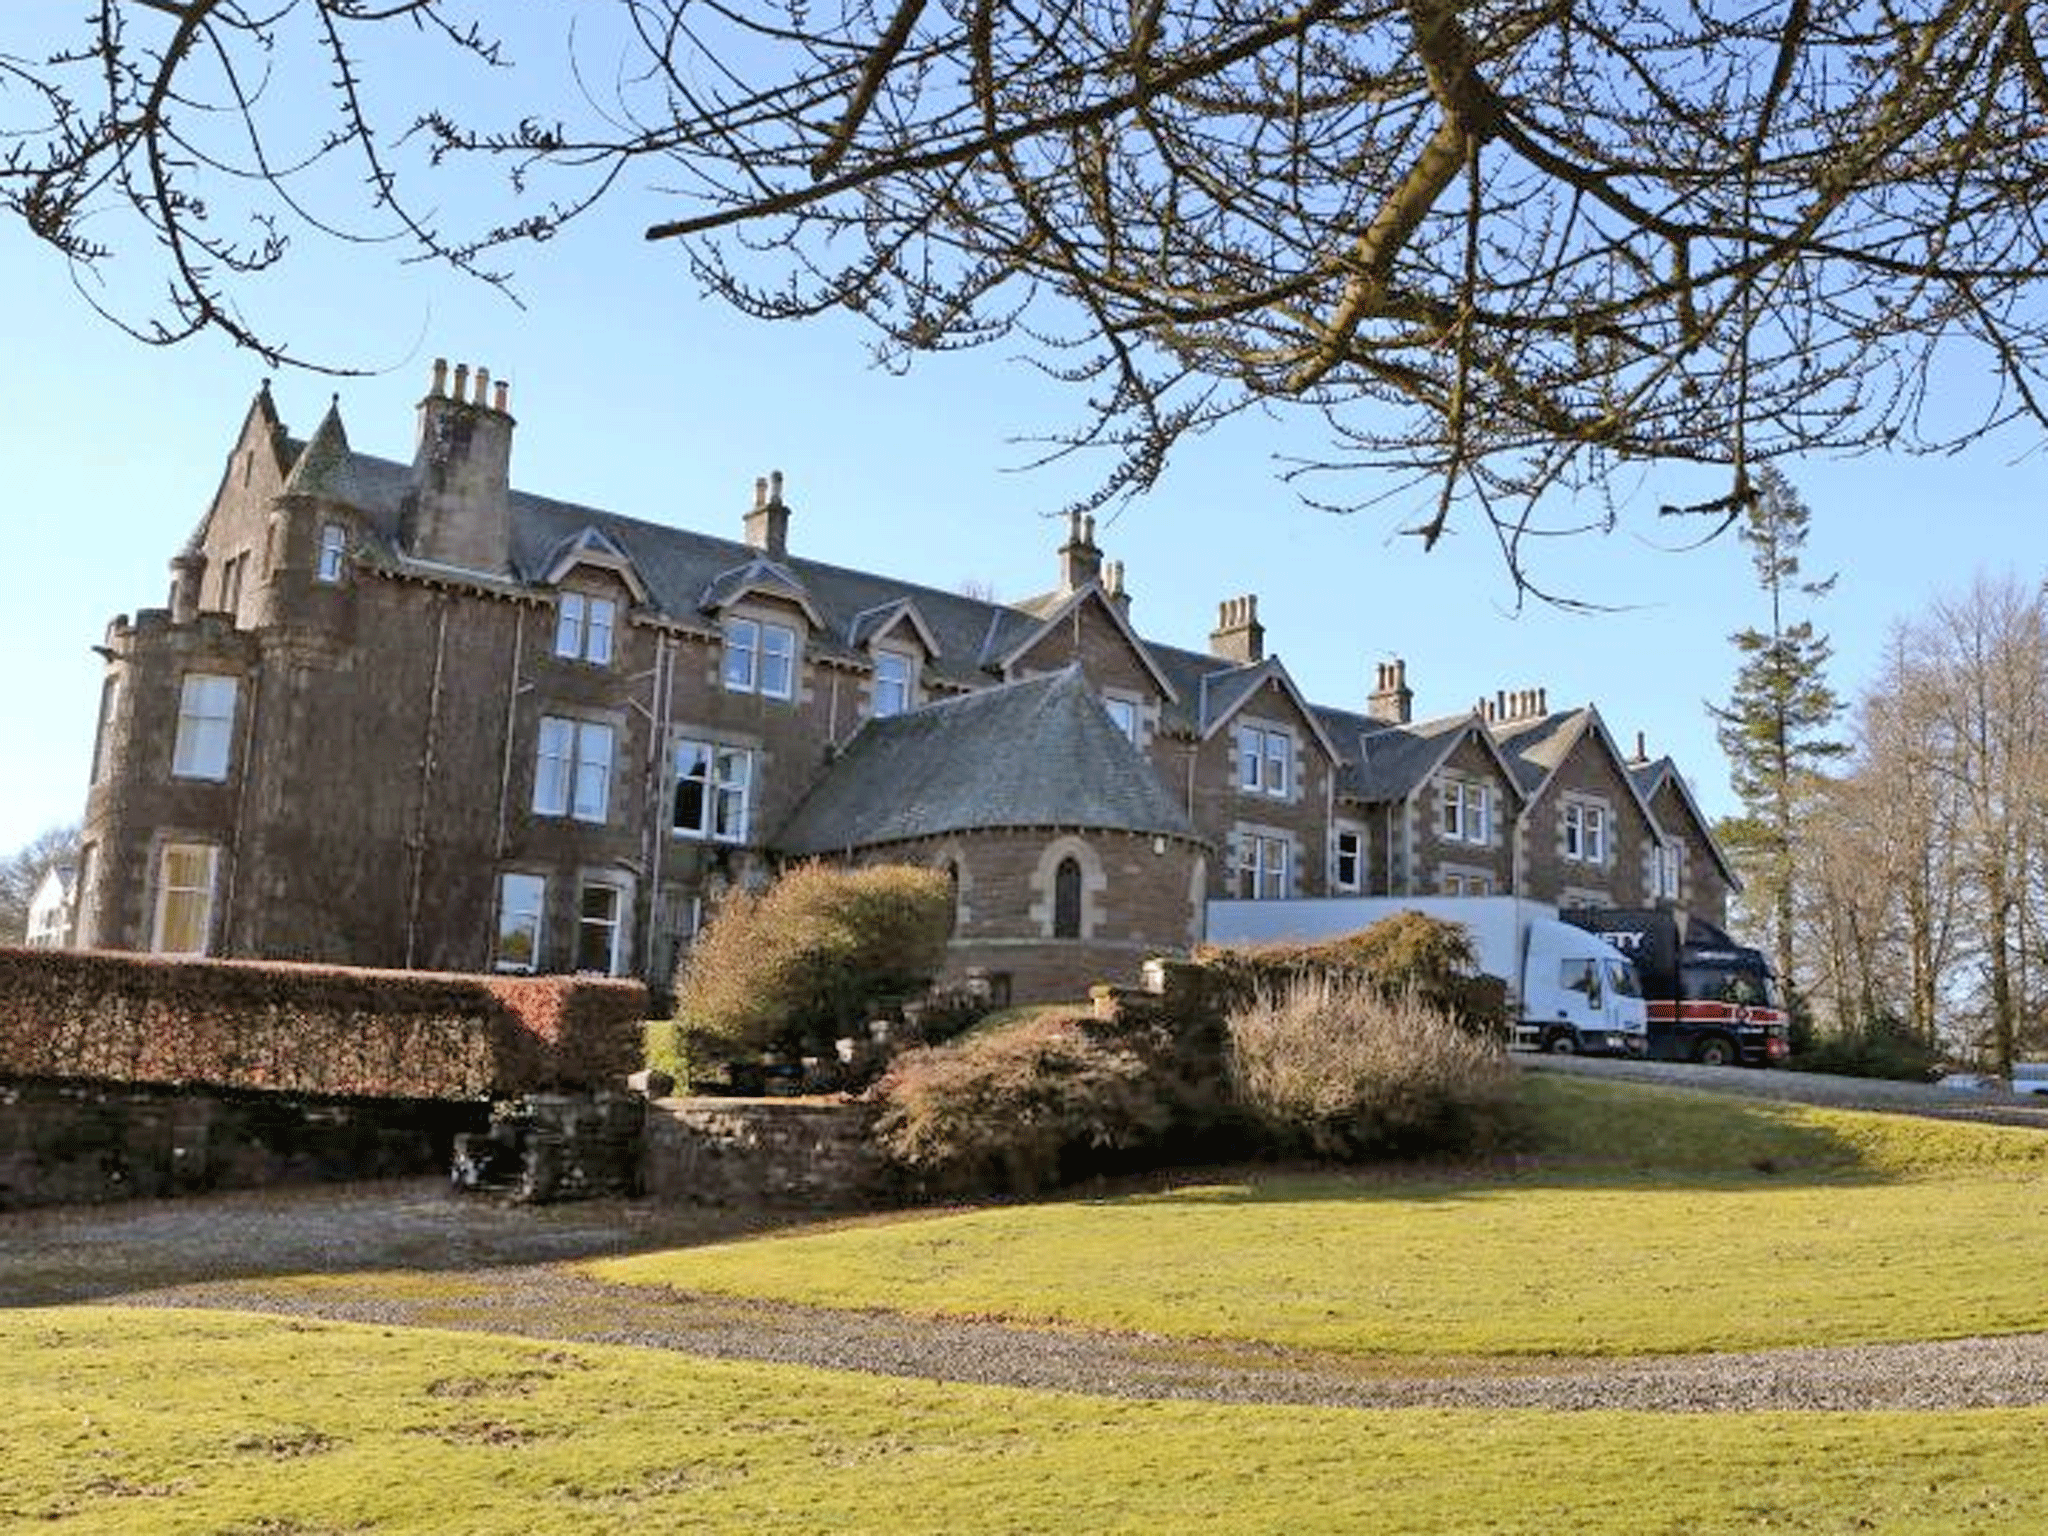 Removal vans sit parked at Cromlix House Hotel after Andy Murray bought the £1.8 million luxury hotel where his brother got married three years ago